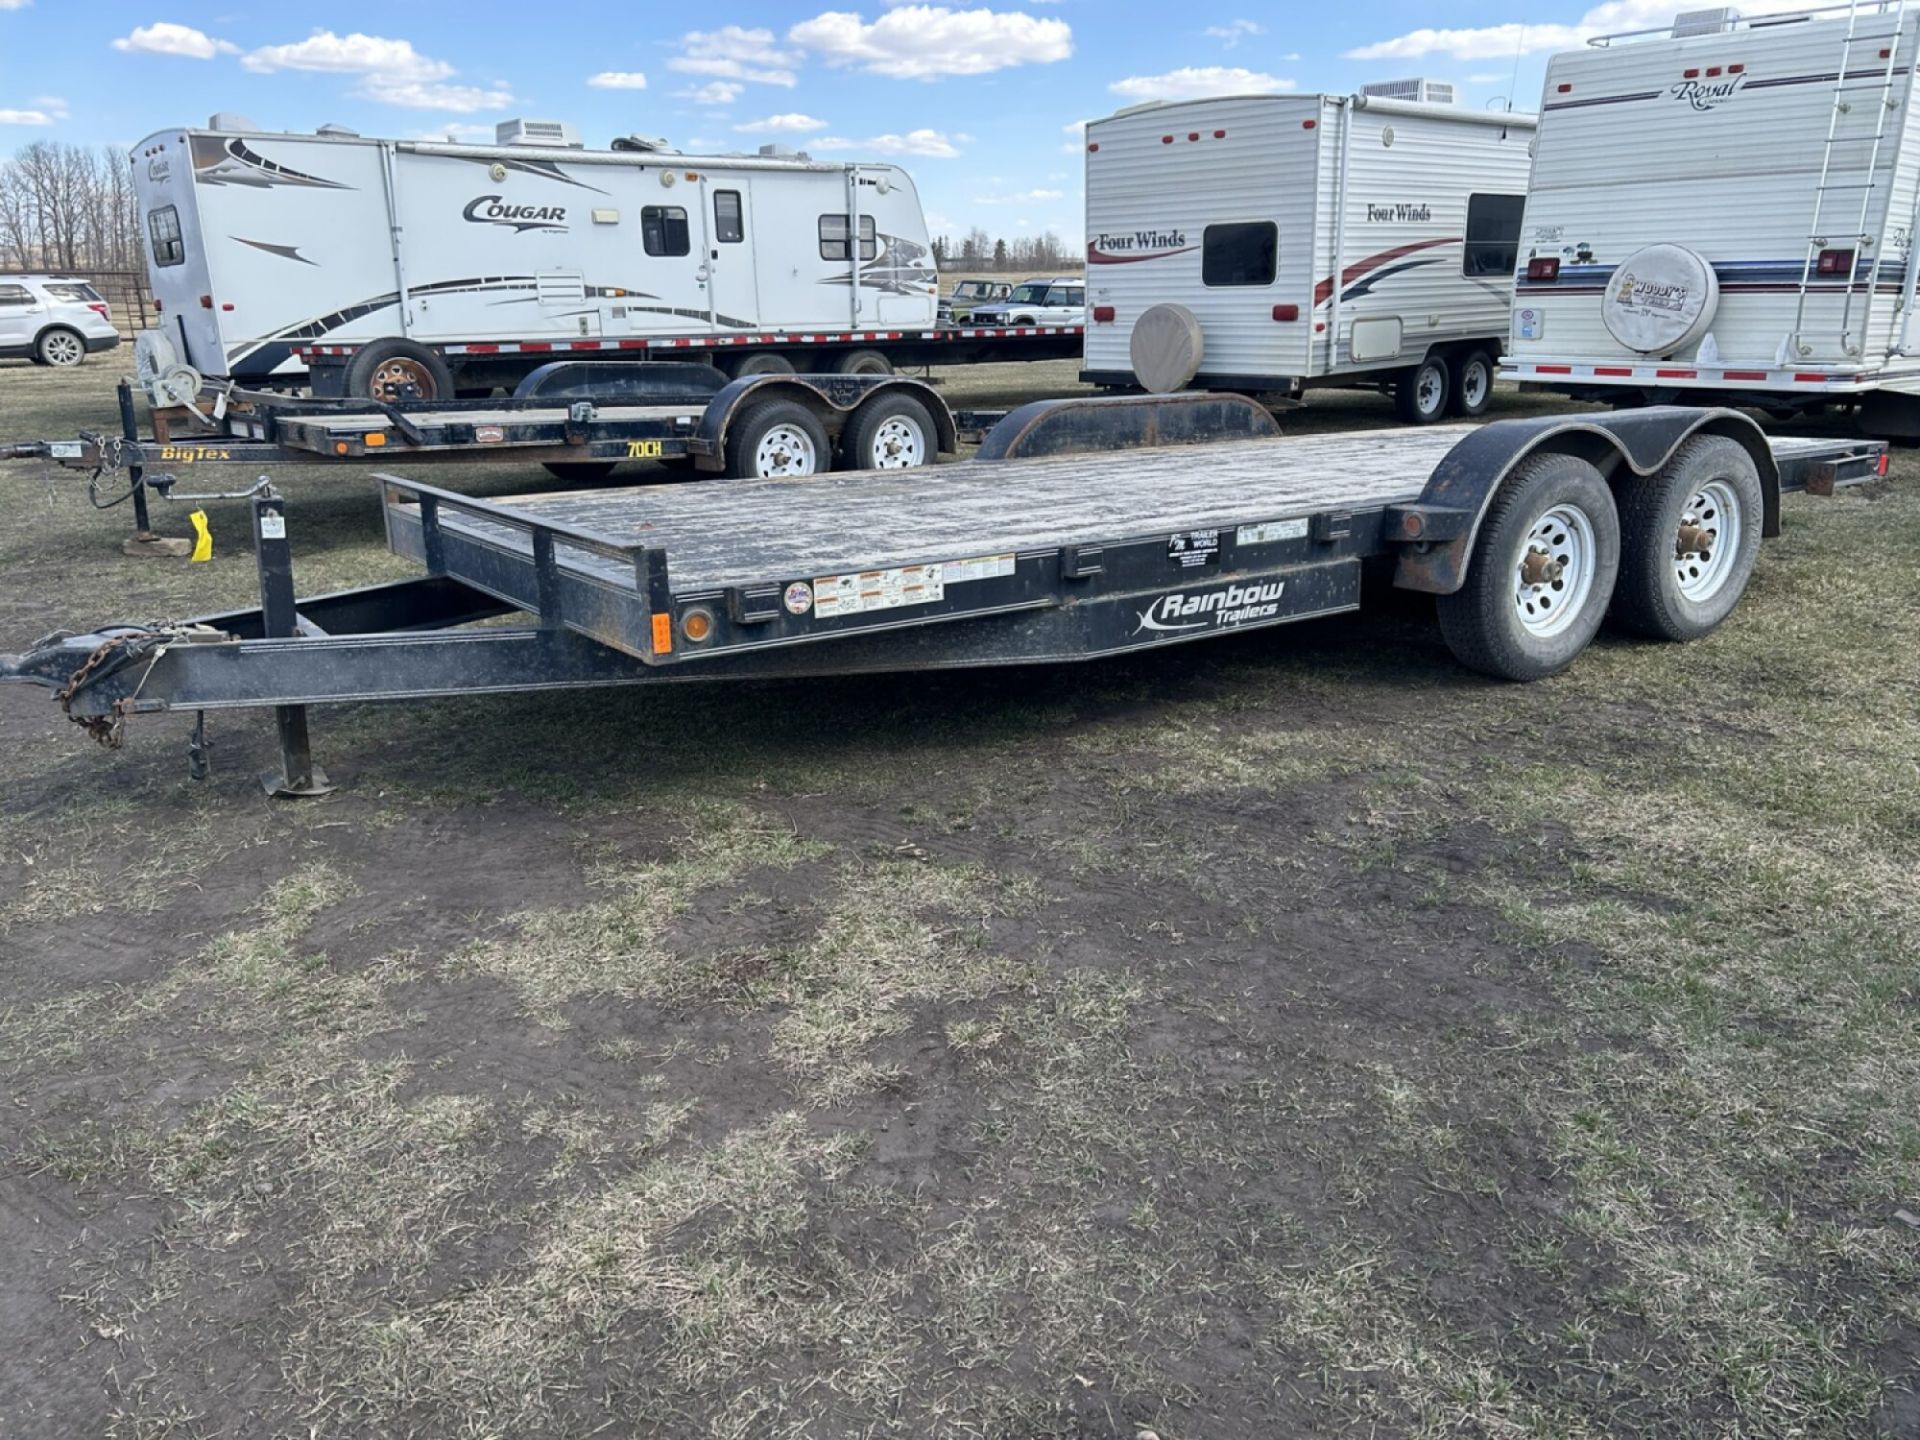 2017 18' CAR HAULER - LIGHTS, BRAKES WORK, NEW TIRES FROM OK TIRE S/N: 2RGBE1824H1000481